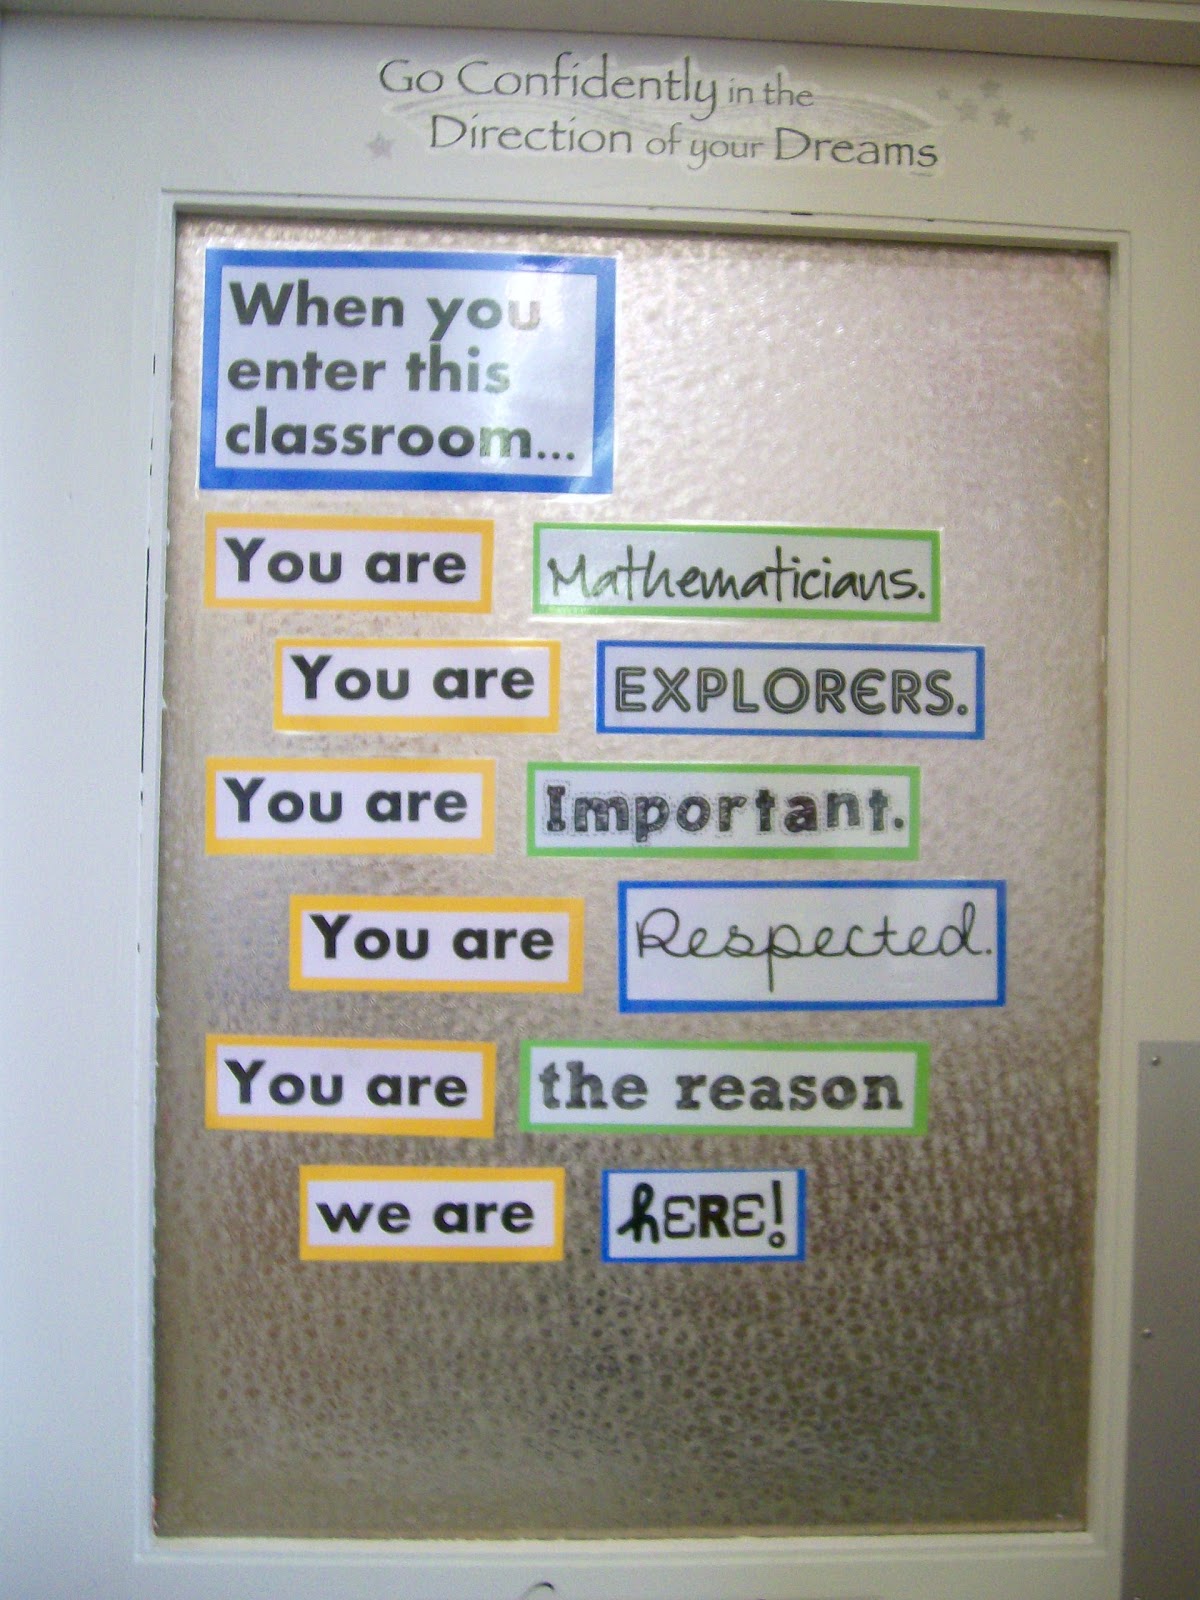 When you enter this classroom door decoration for high school or middle school math classroom